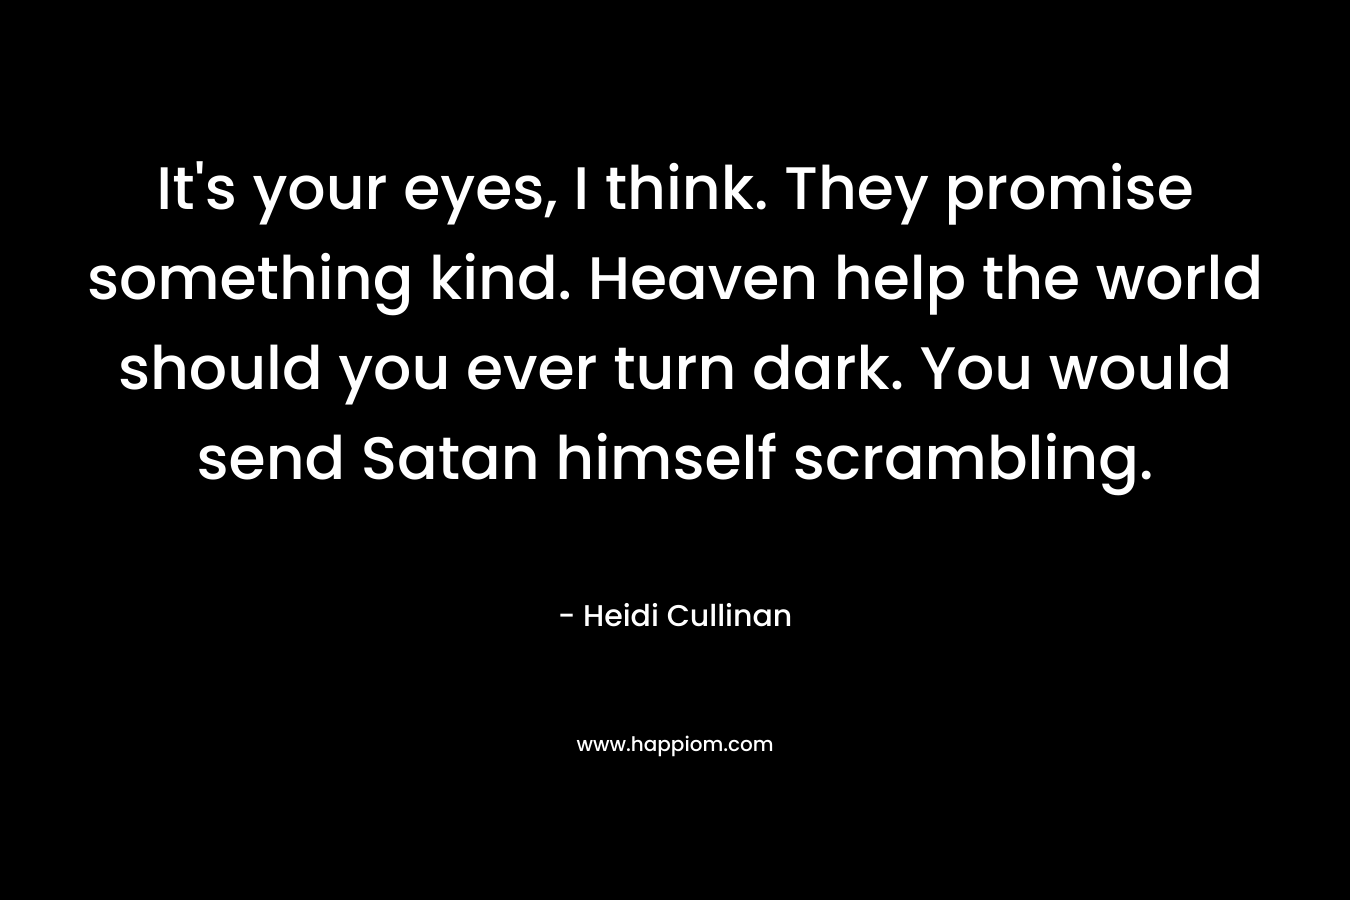 It’s your eyes, I think. They promise something kind. Heaven help the world should you ever turn dark. You would send Satan himself scrambling. – Heidi Cullinan